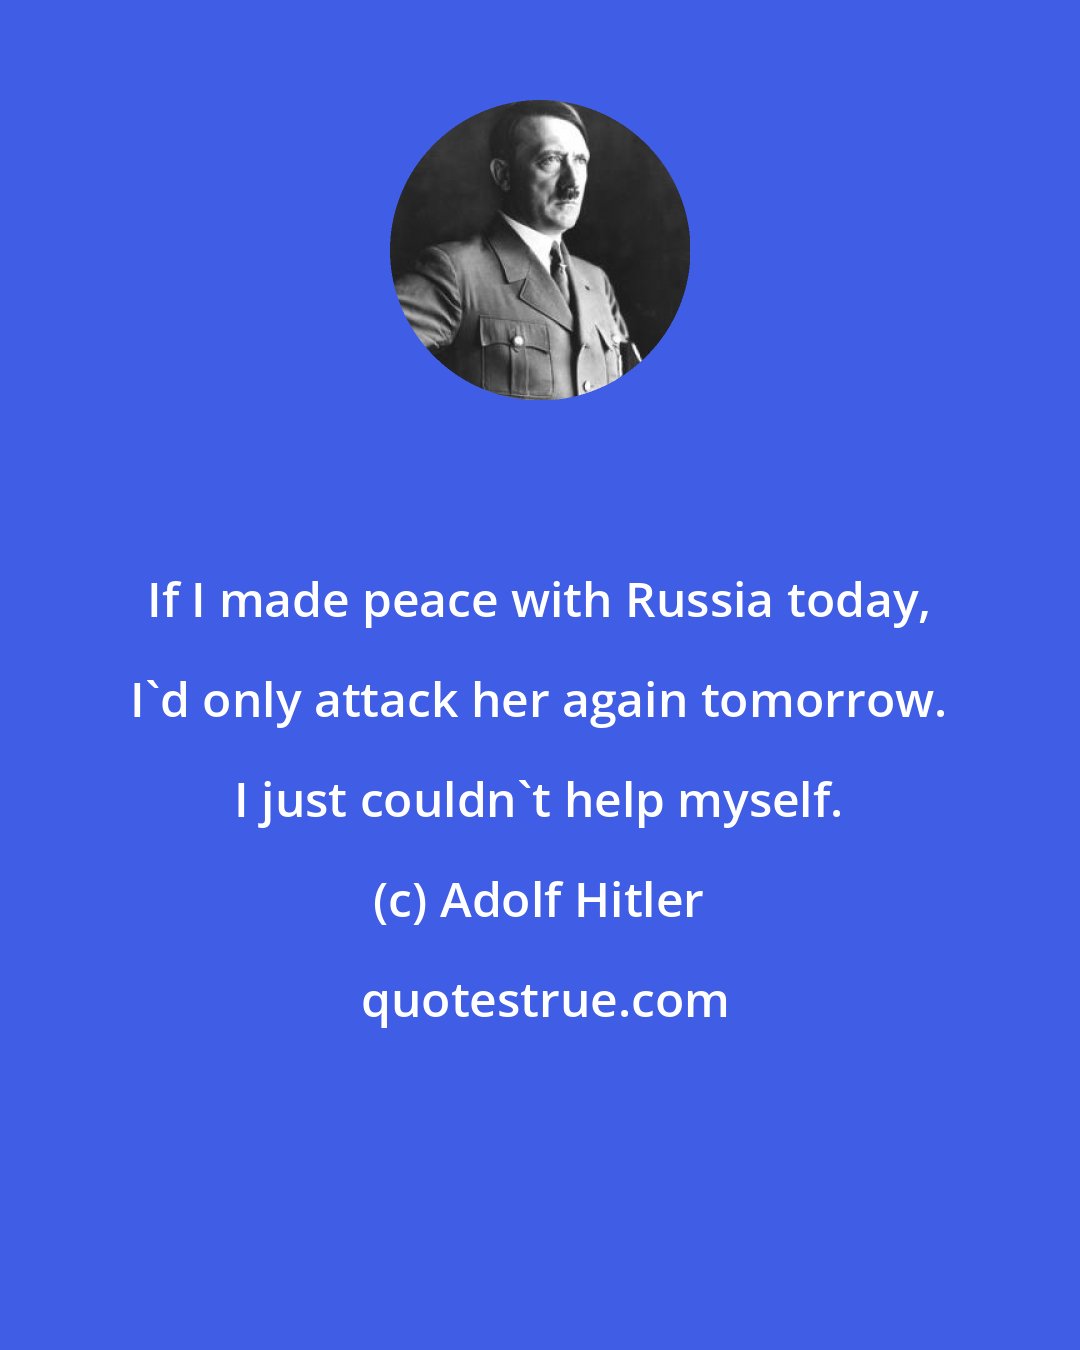 Adolf Hitler: If I made peace with Russia today, I'd only attack her again tomorrow. I just couldn't help myself.